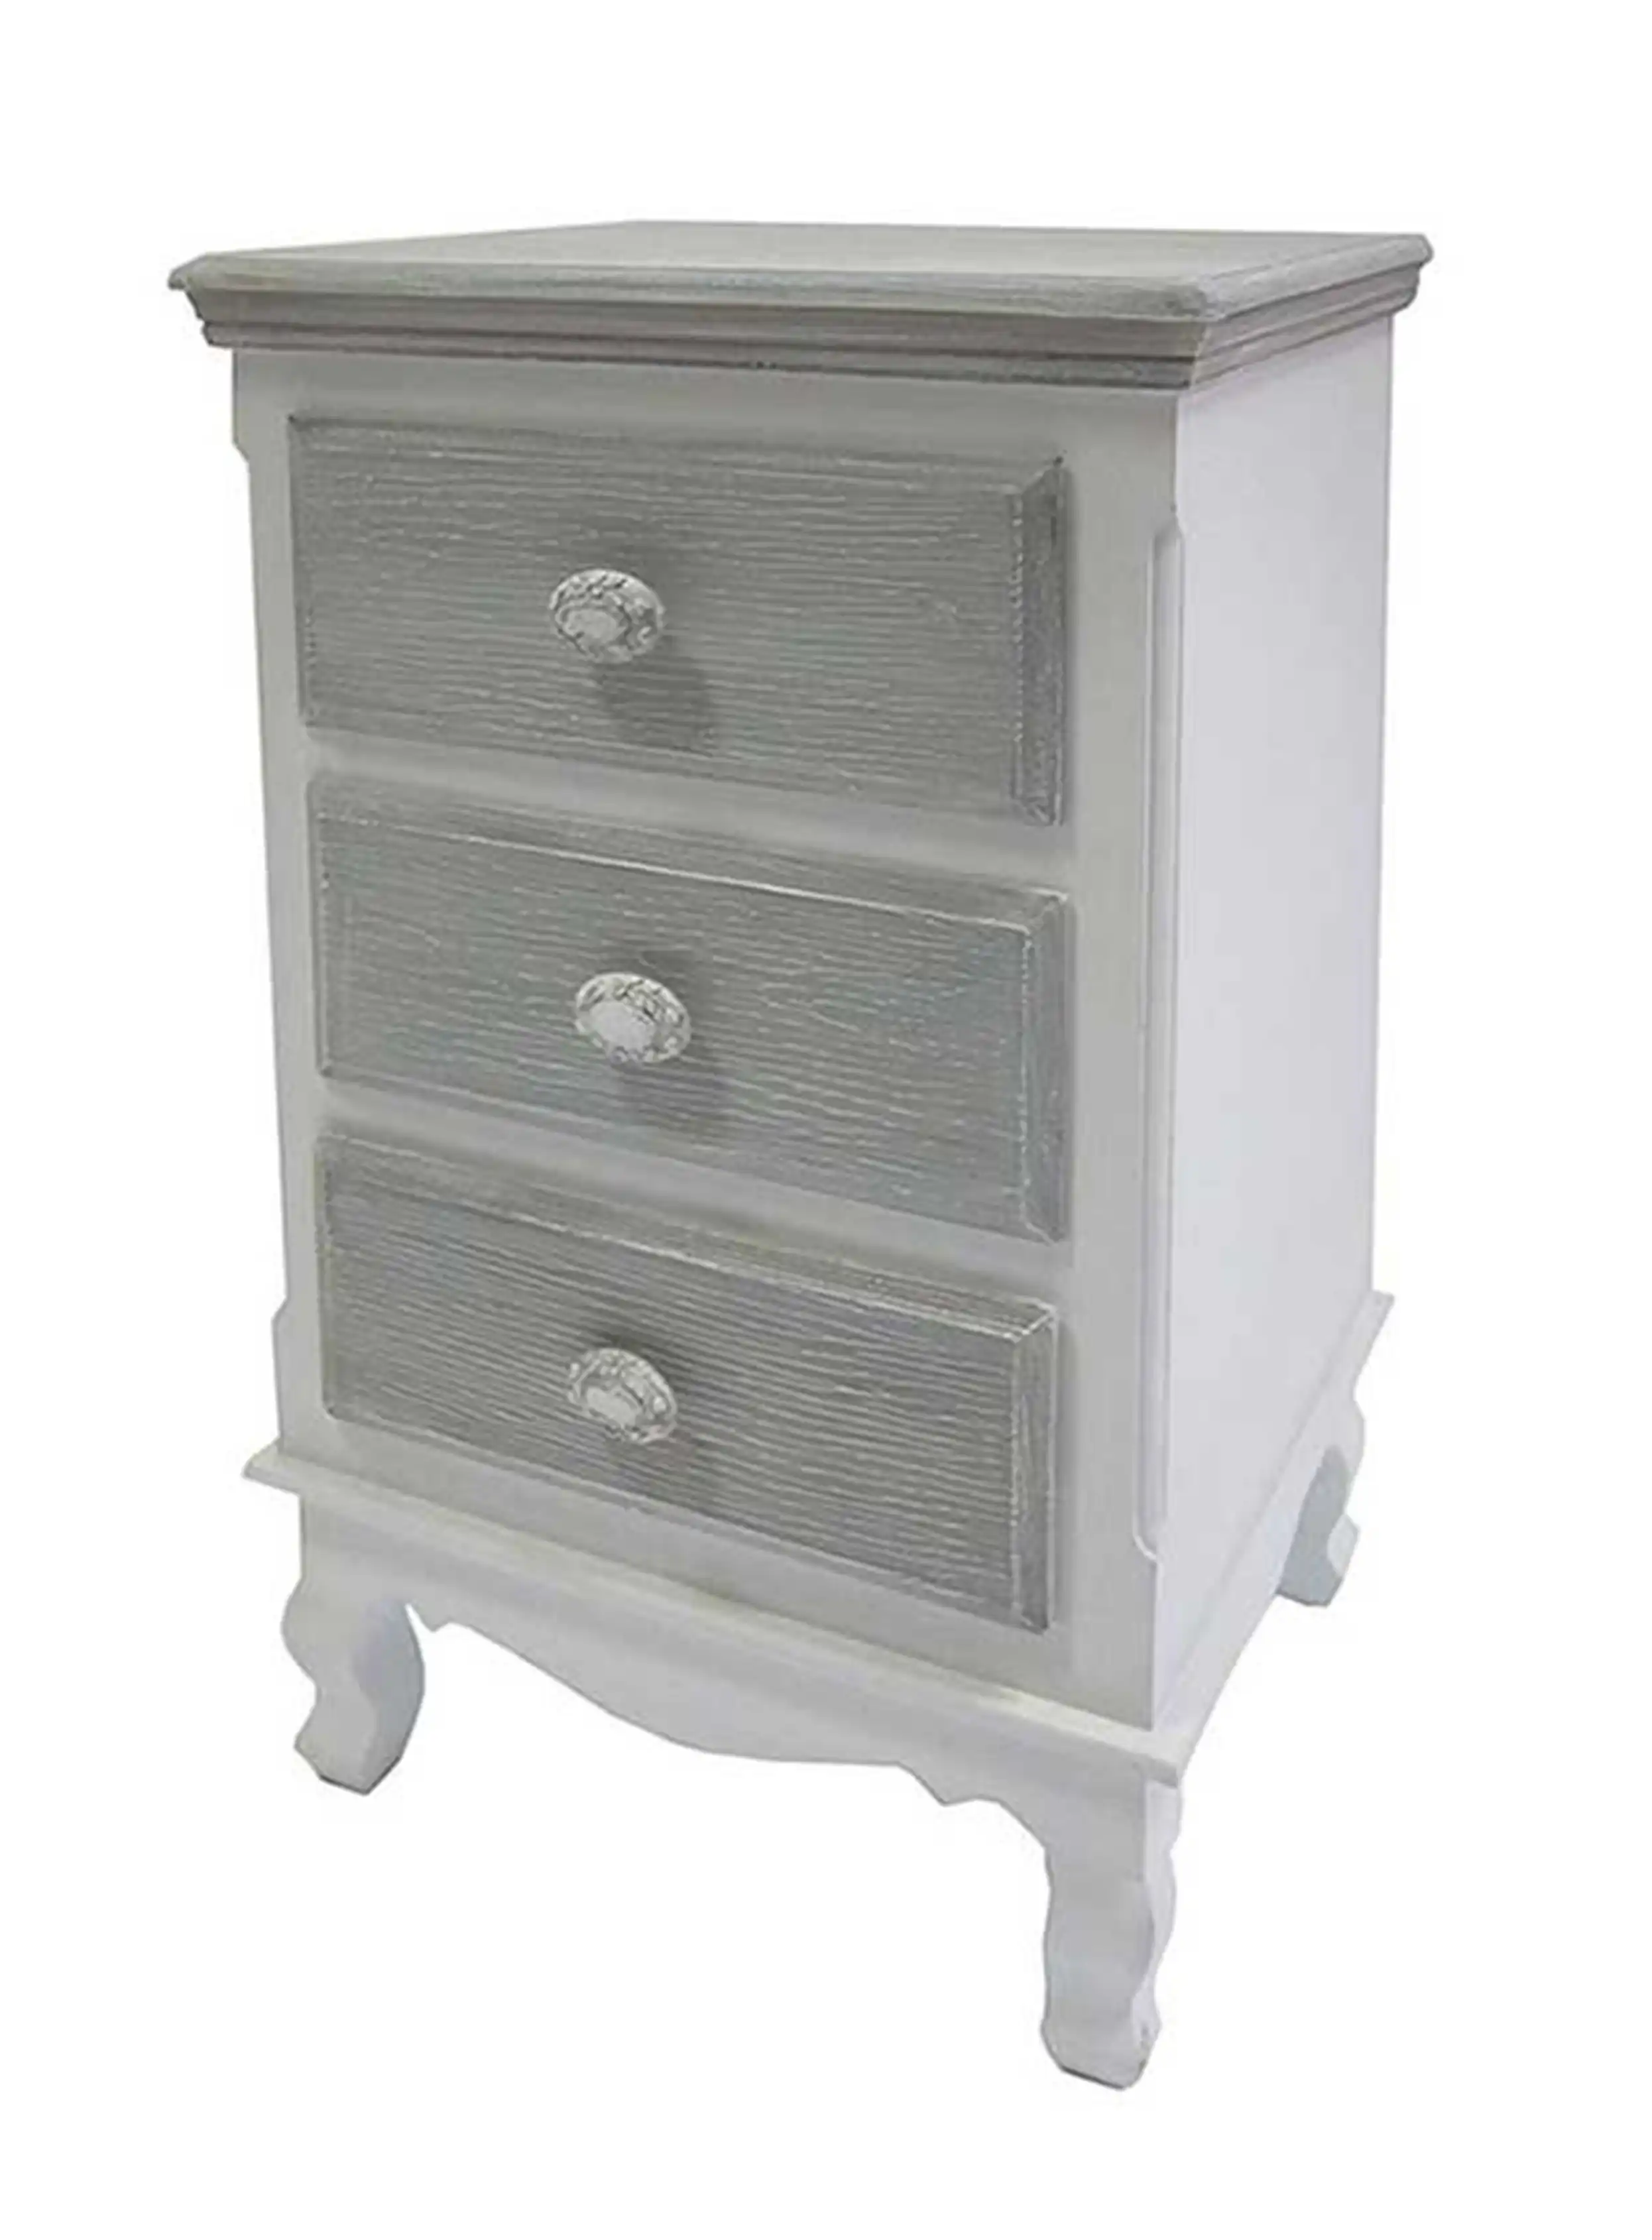 Bedside with 3 drawers - popular handicrafts